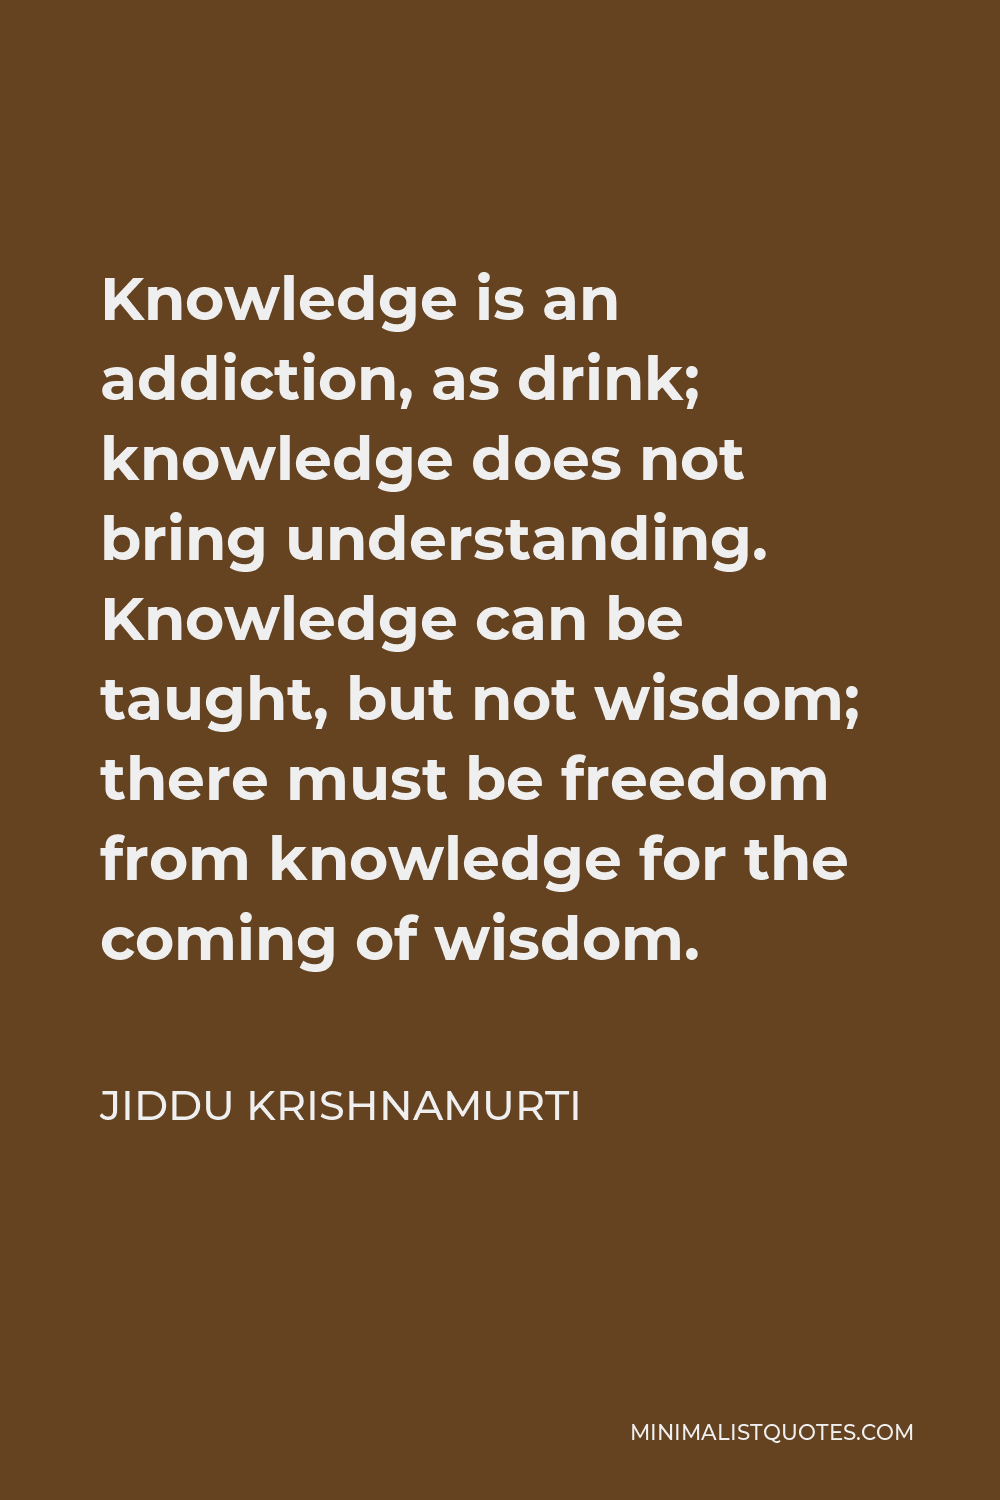 Jiddu Krishnamurti Quote - Knowledge is an addiction, as drink; knowledge does not bring understanding. Knowledge can be taught, but not wisdom; there must be freedom from knowledge for the coming of wisdom.